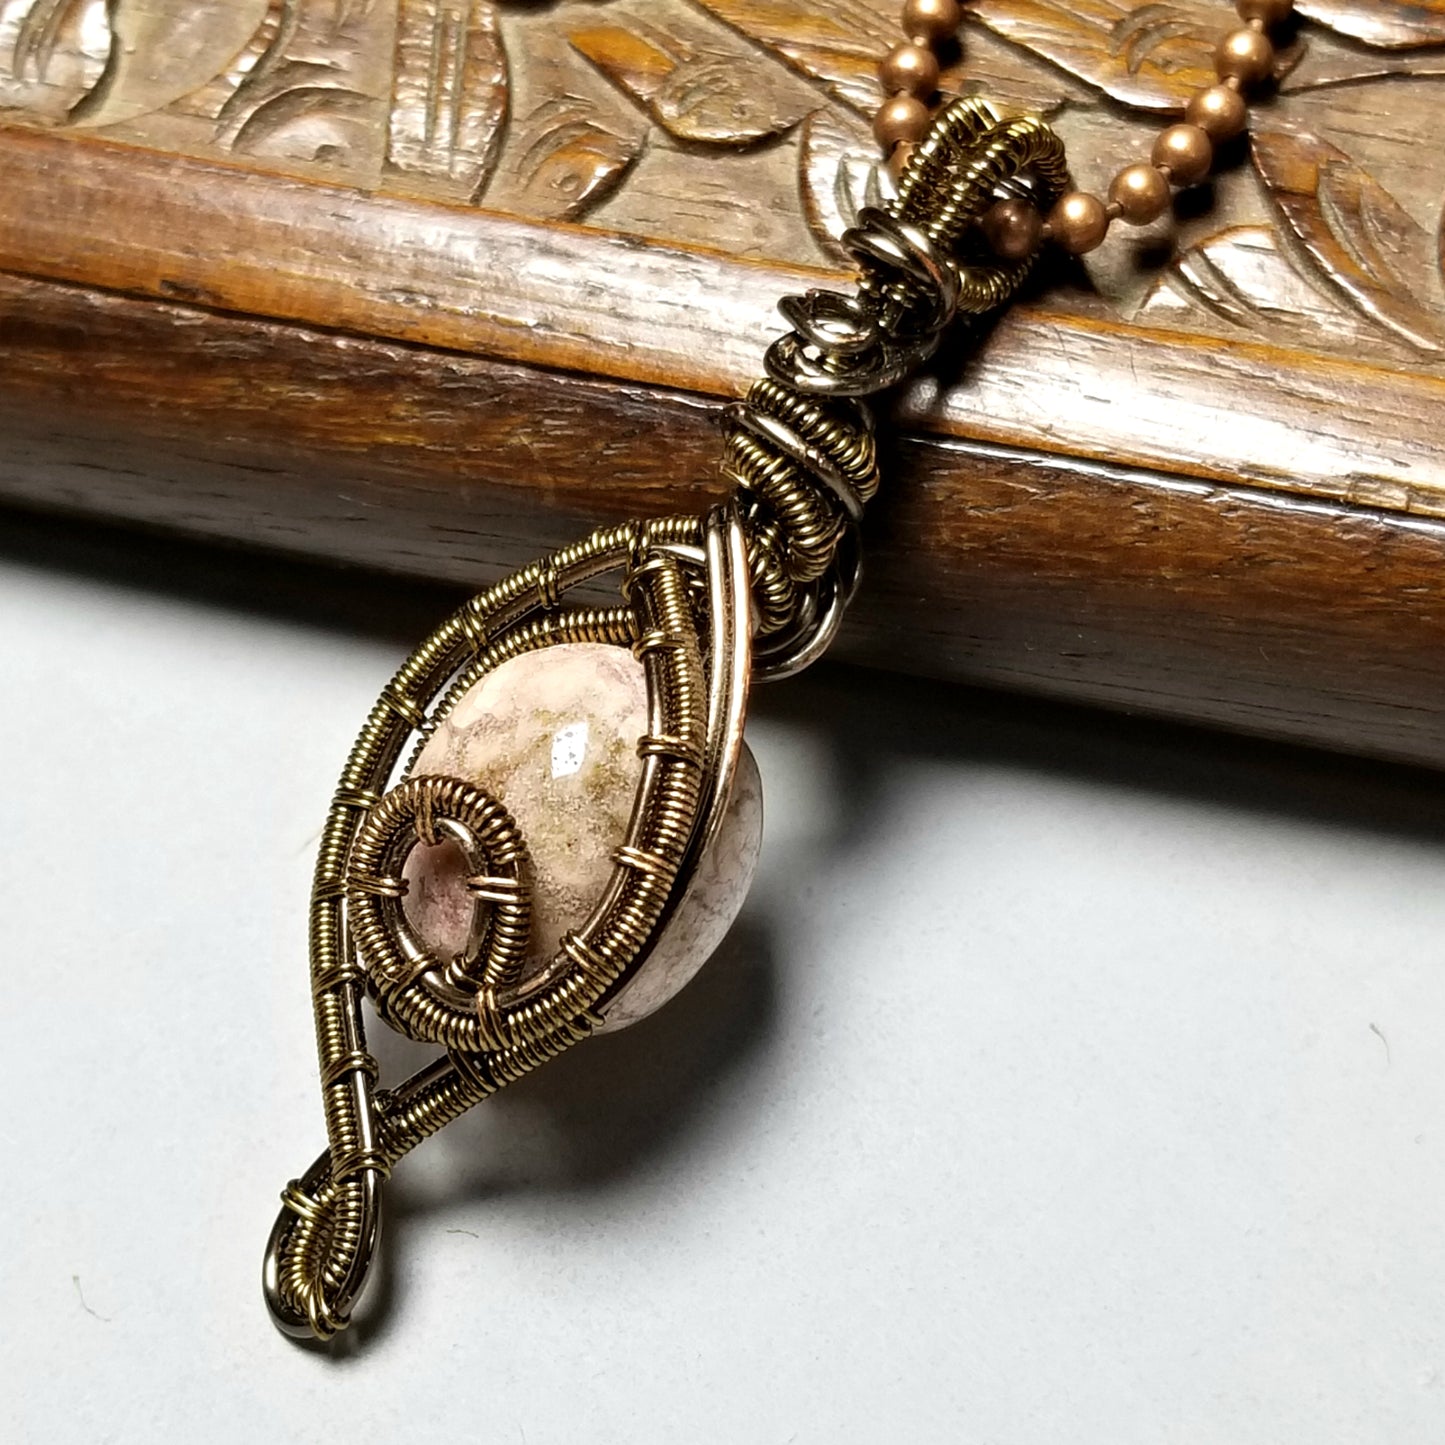 Jasper Necklace, Wire Wrapped Pink Stone Pendant